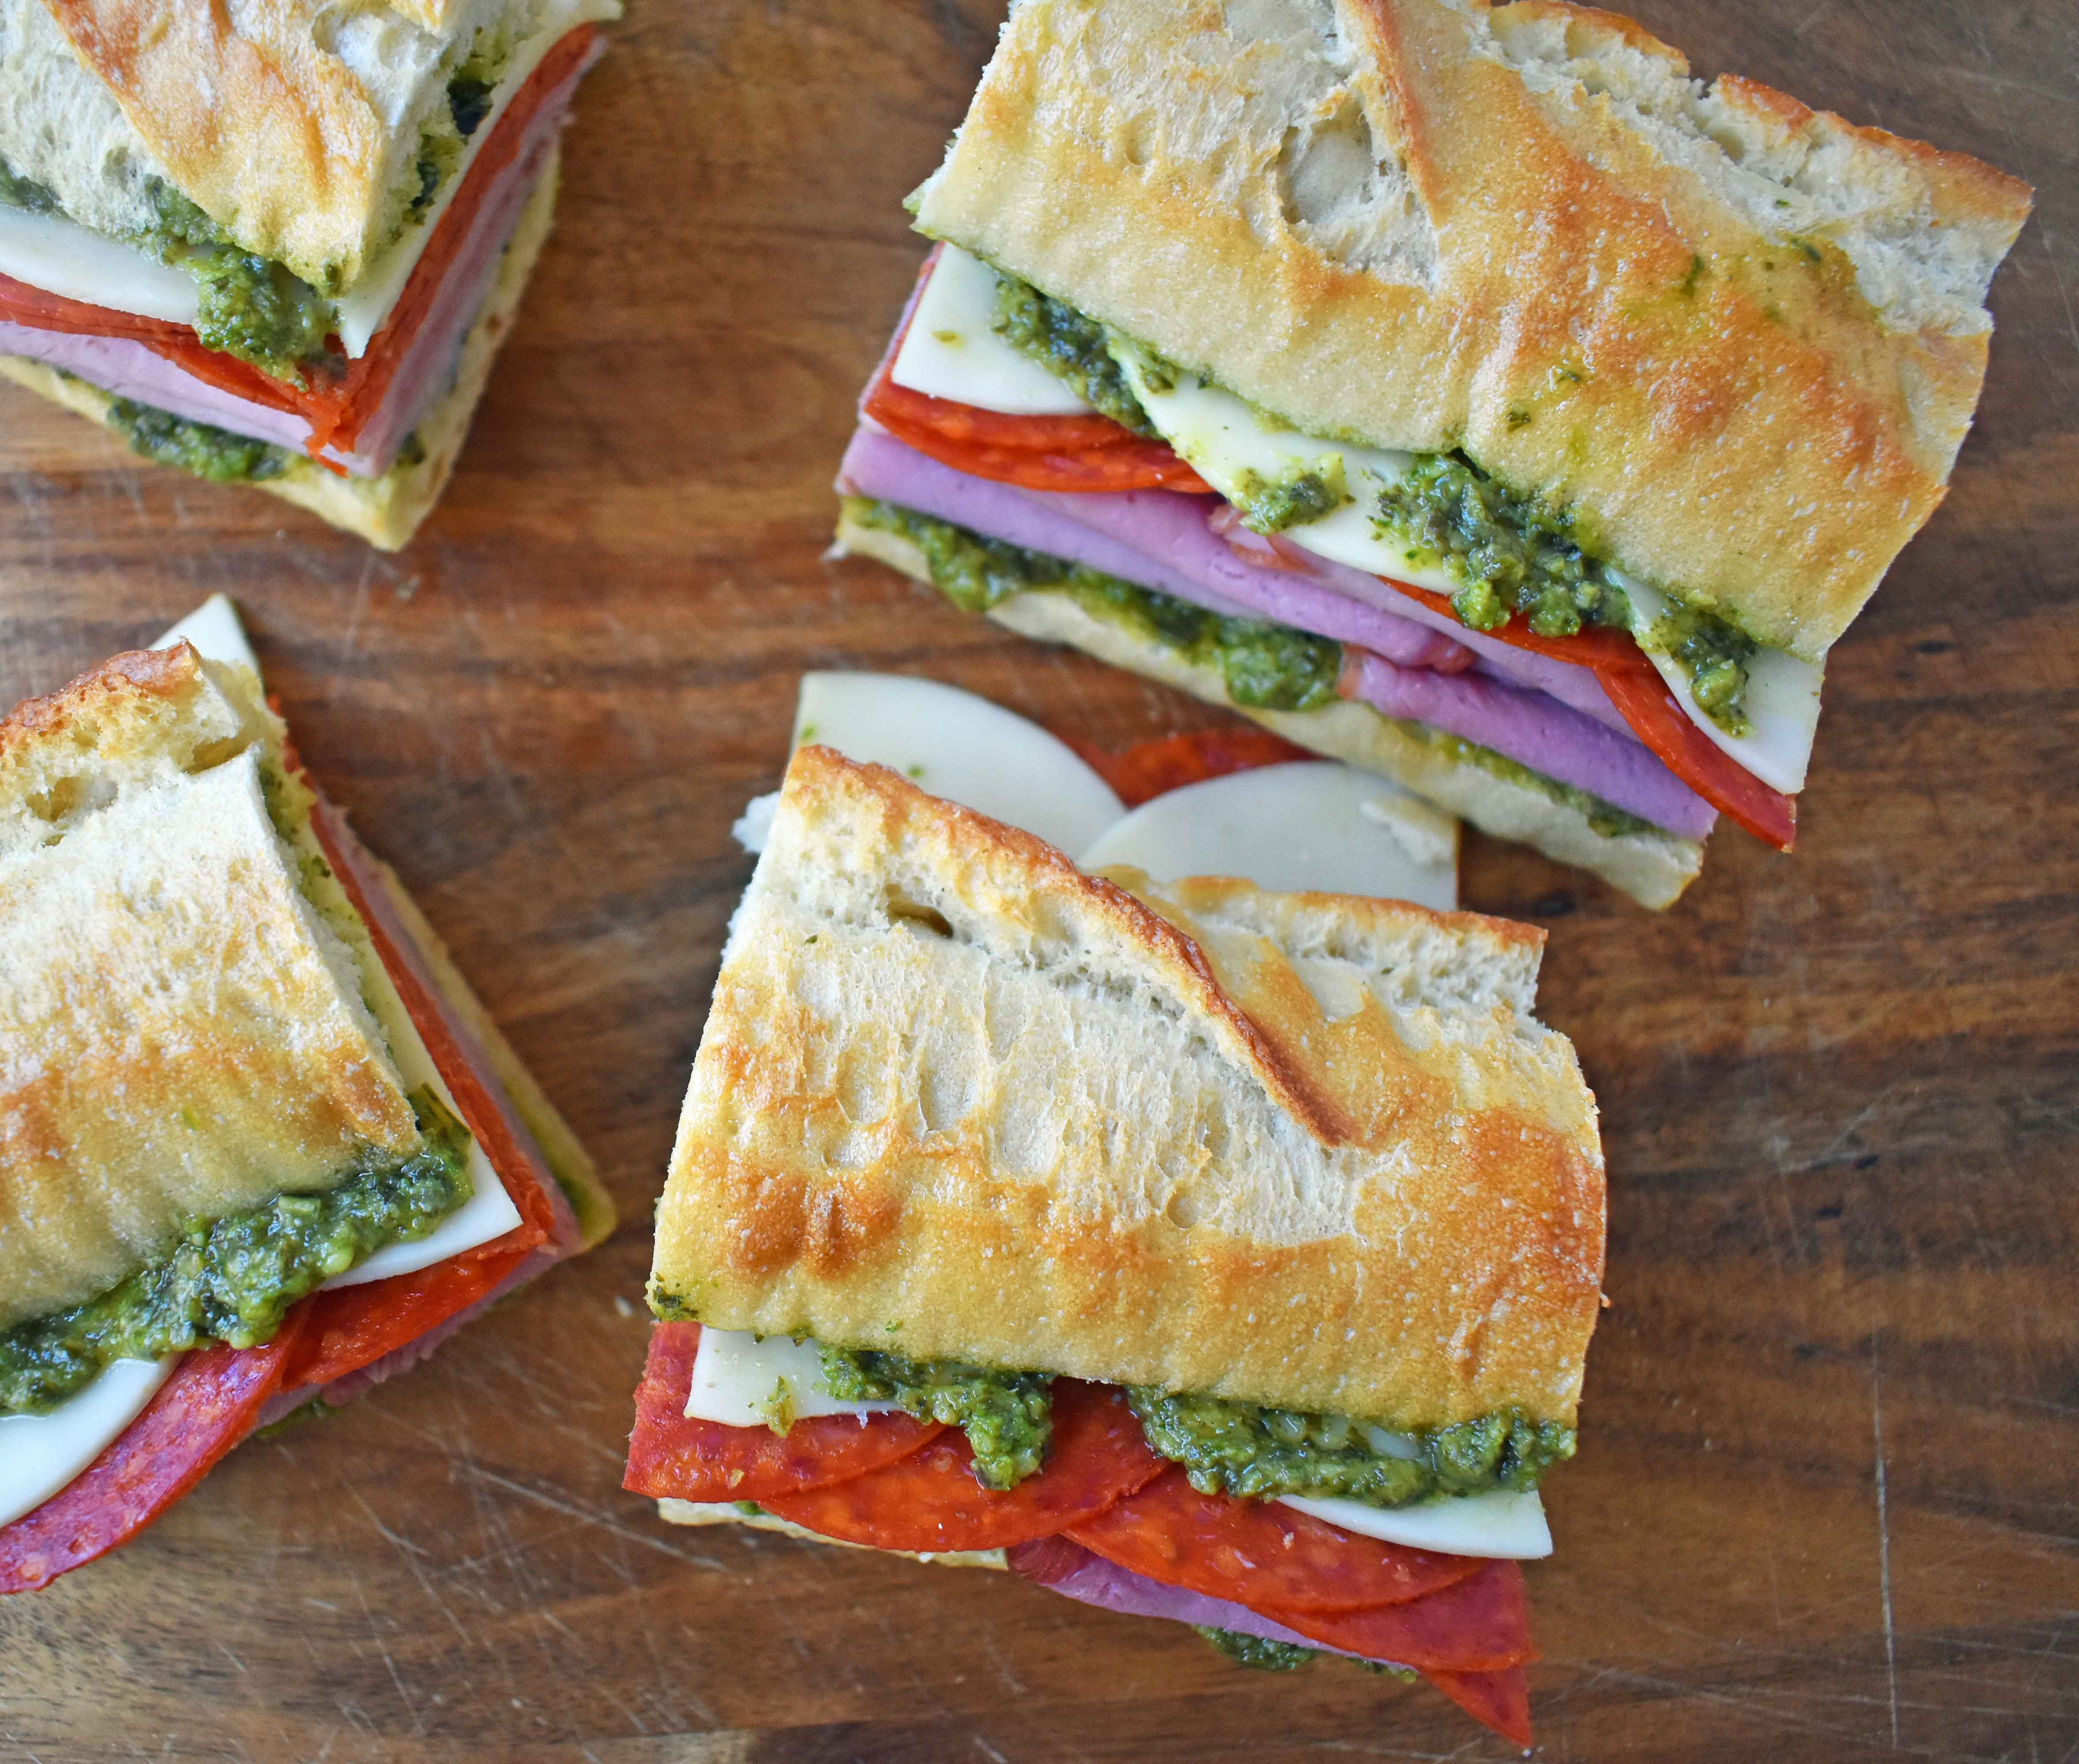 Italian Pressed Sandwiches made with rustic French bread layered with Italian meats and cheeses, pesto sauce or olive oil and vinegar, and marinated tomatoes. This Italian Pressed Sandwich with pesto sauce is perfect for a picnic, kids lunch, or for a casual lunch. www.modernhoney.com